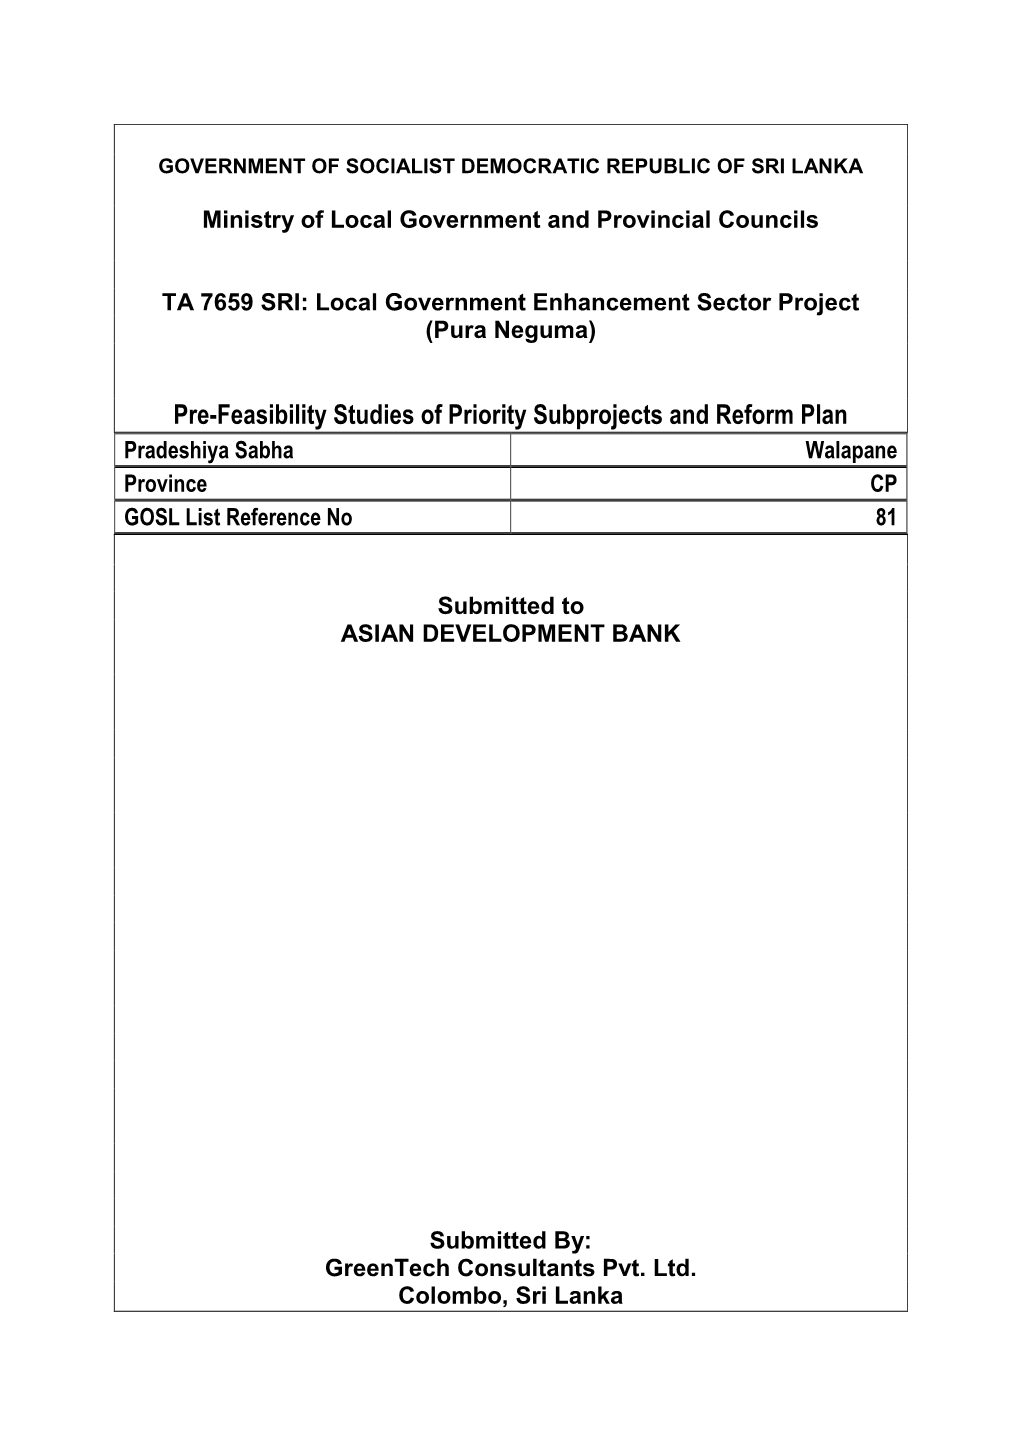 Pre-Feasibility Studies of Priority Subprojects and Reform Plan Pradeshiya Sabha Walapane Province CP GOSL List Reference No 81